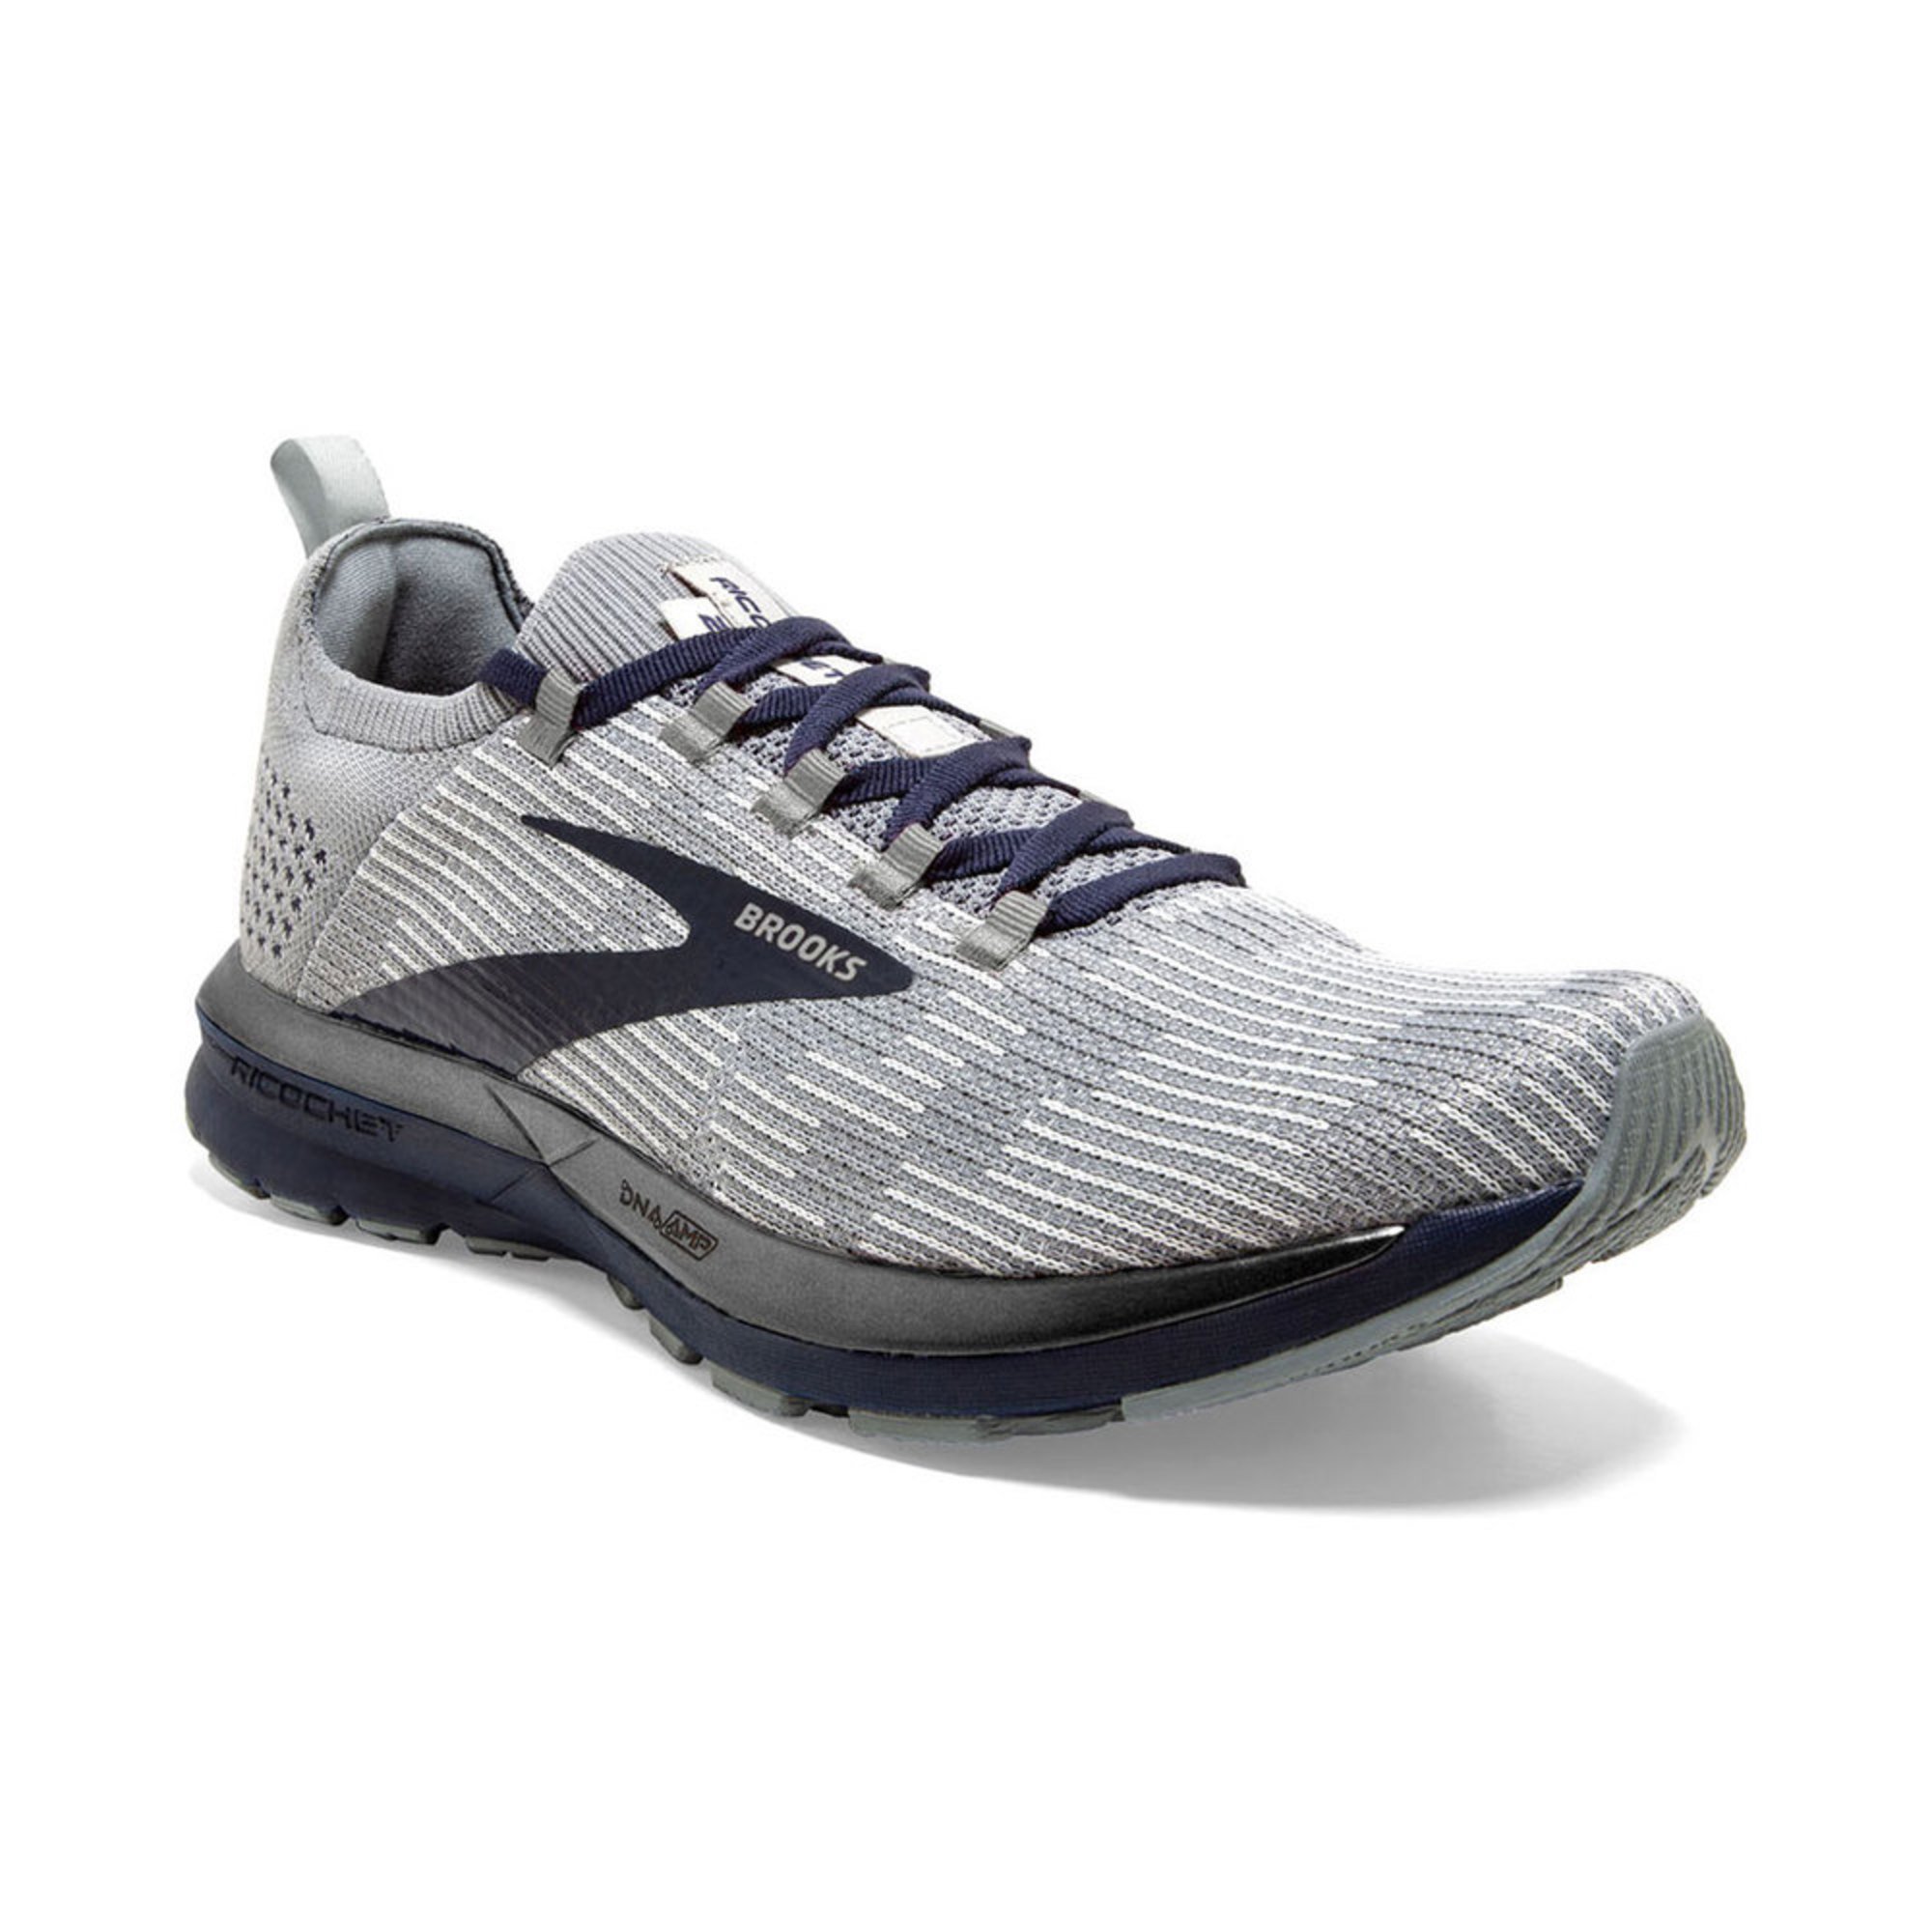 brooks shoes retailers